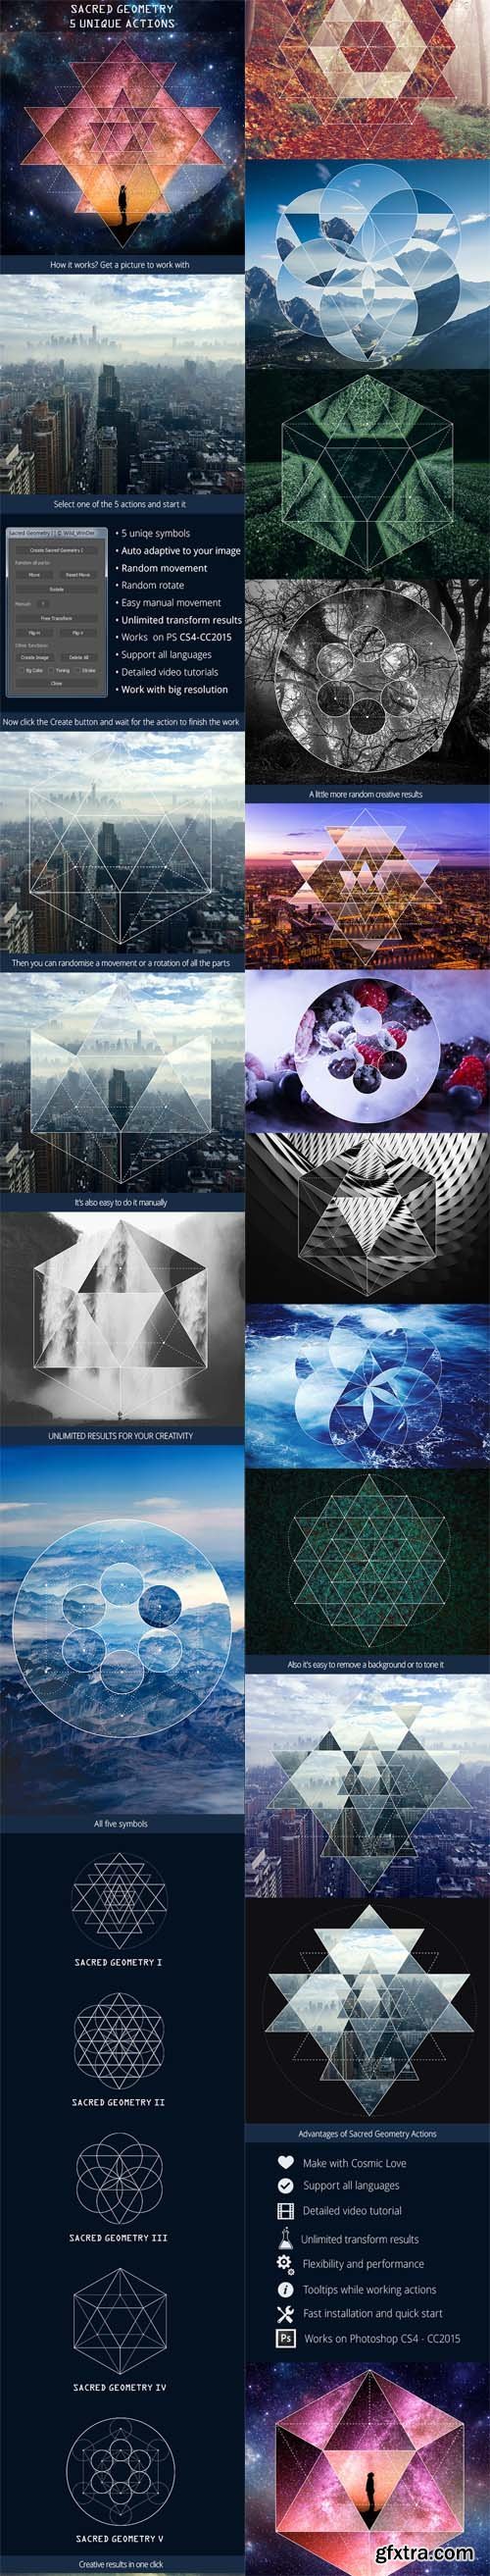 GraphicRiver Sacred Geometry Photoshop Actions 13922725